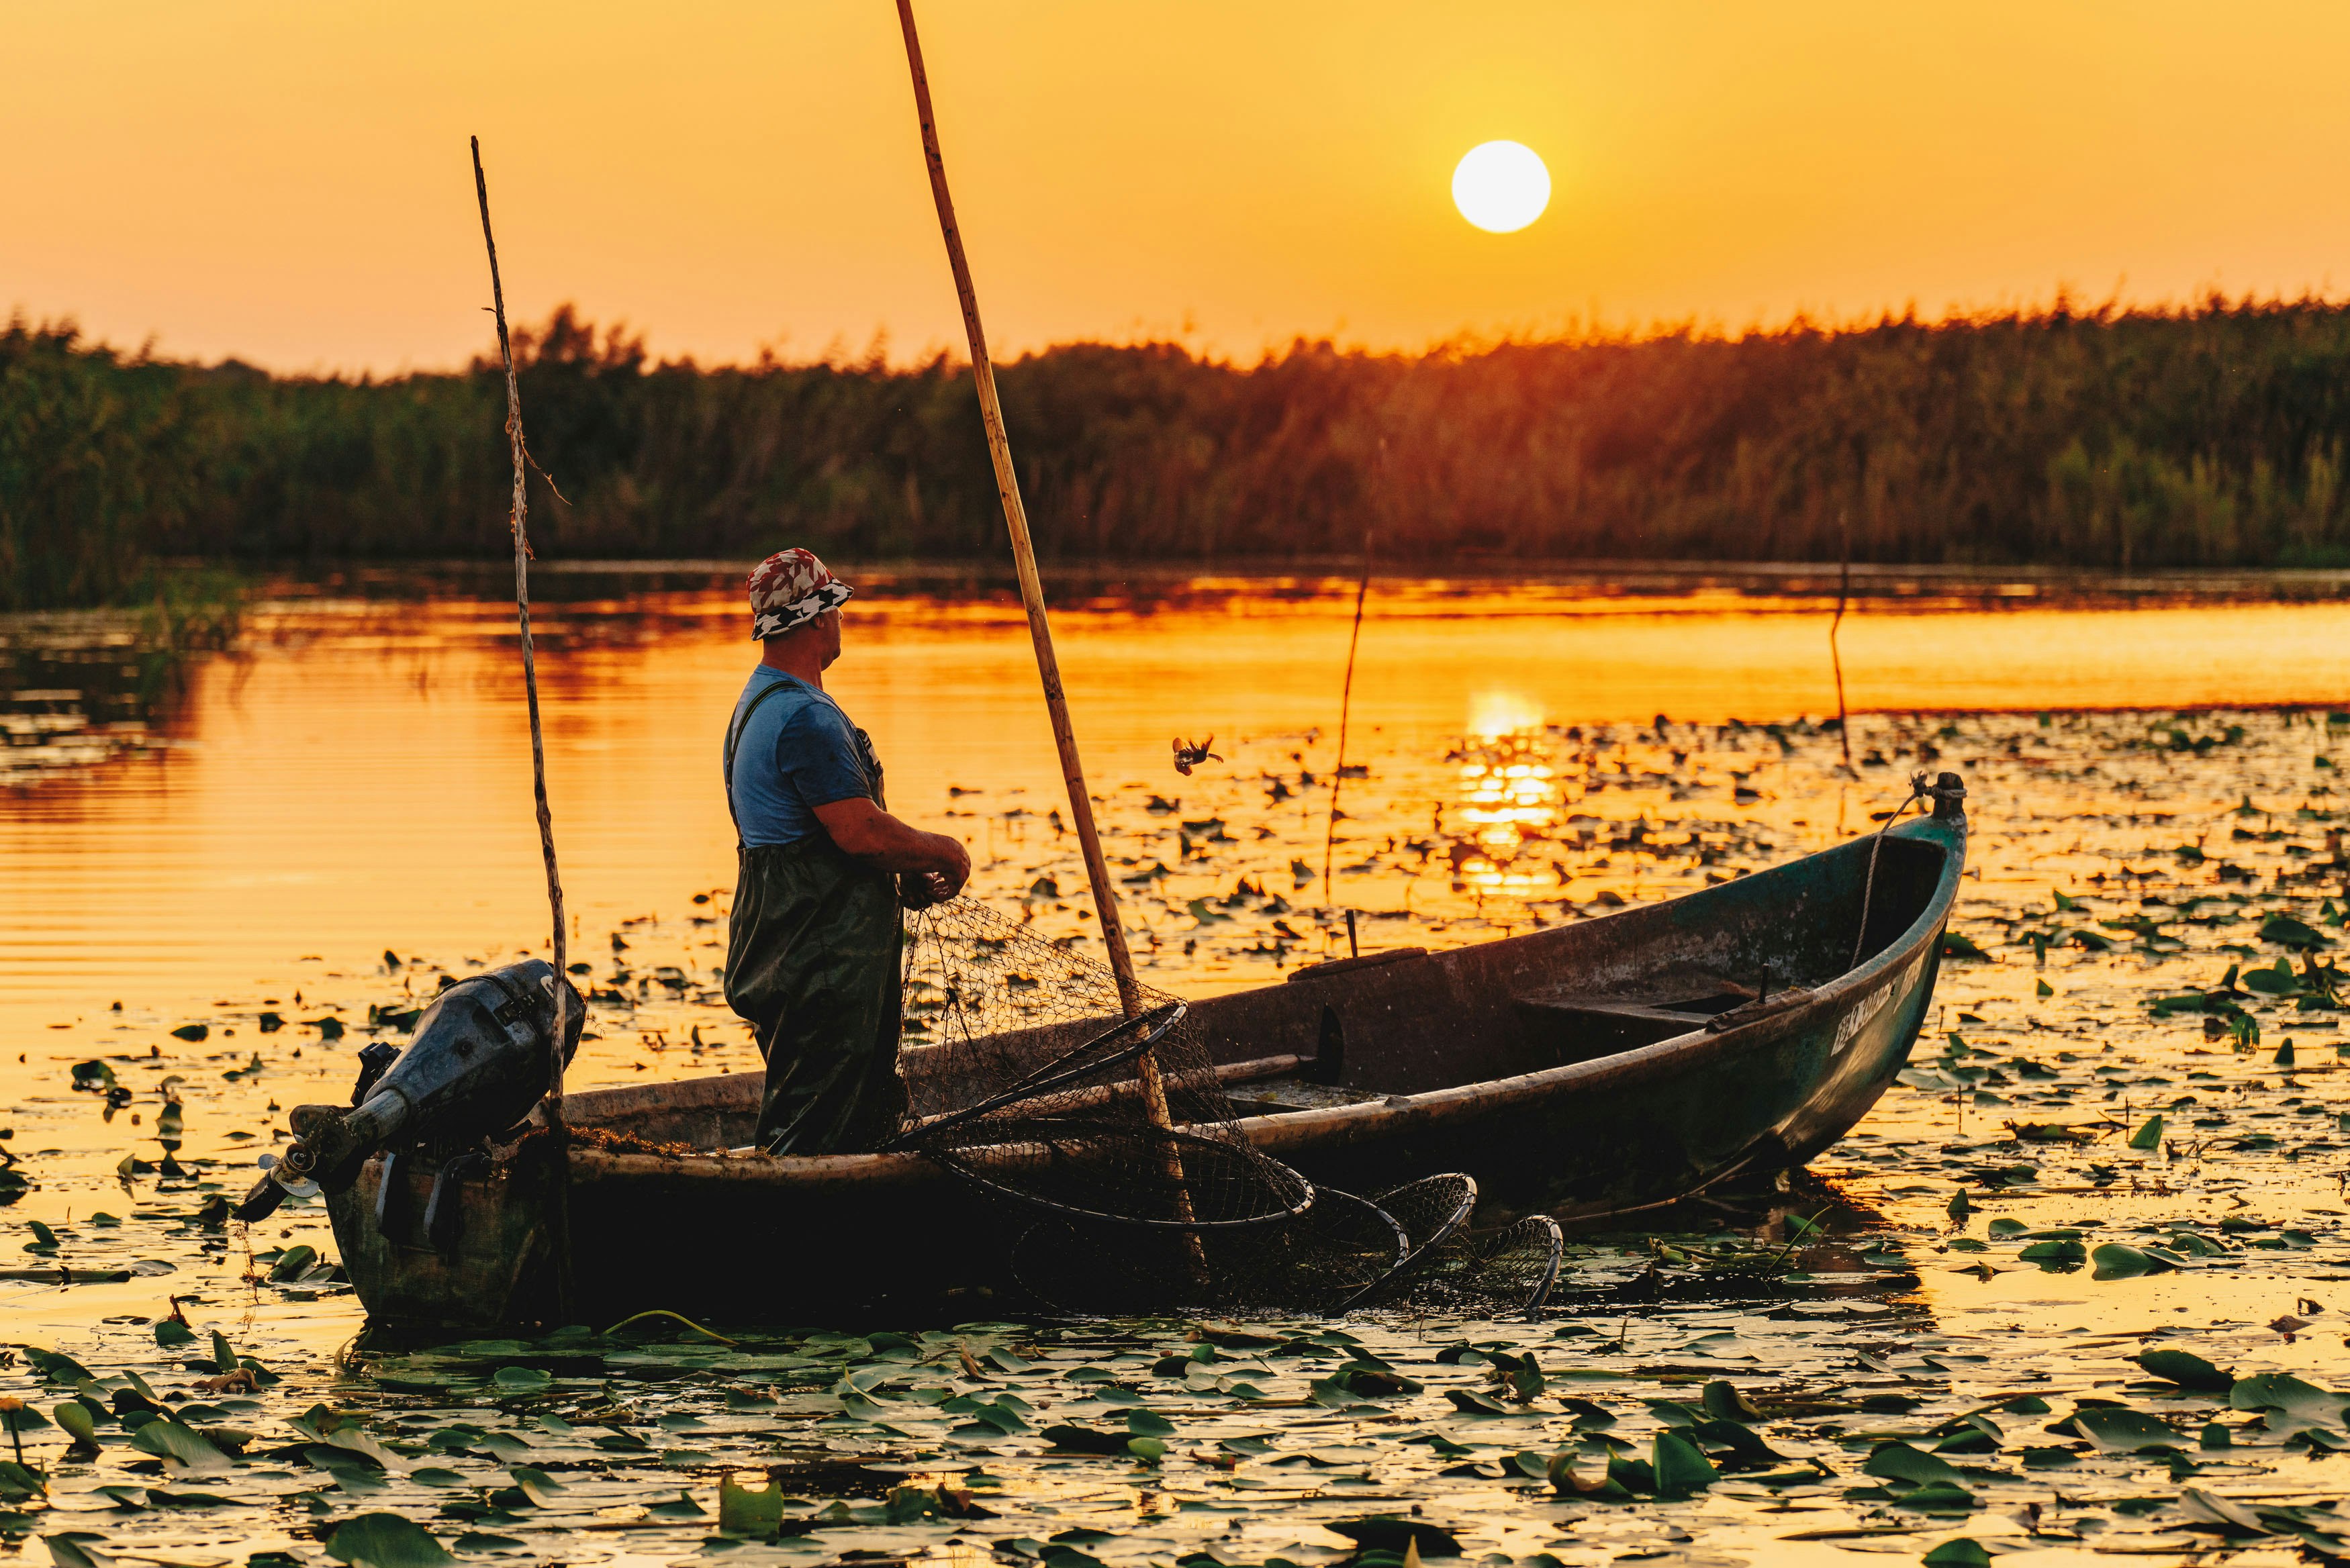 man in blue shirt and black pants riding on boat during sunset